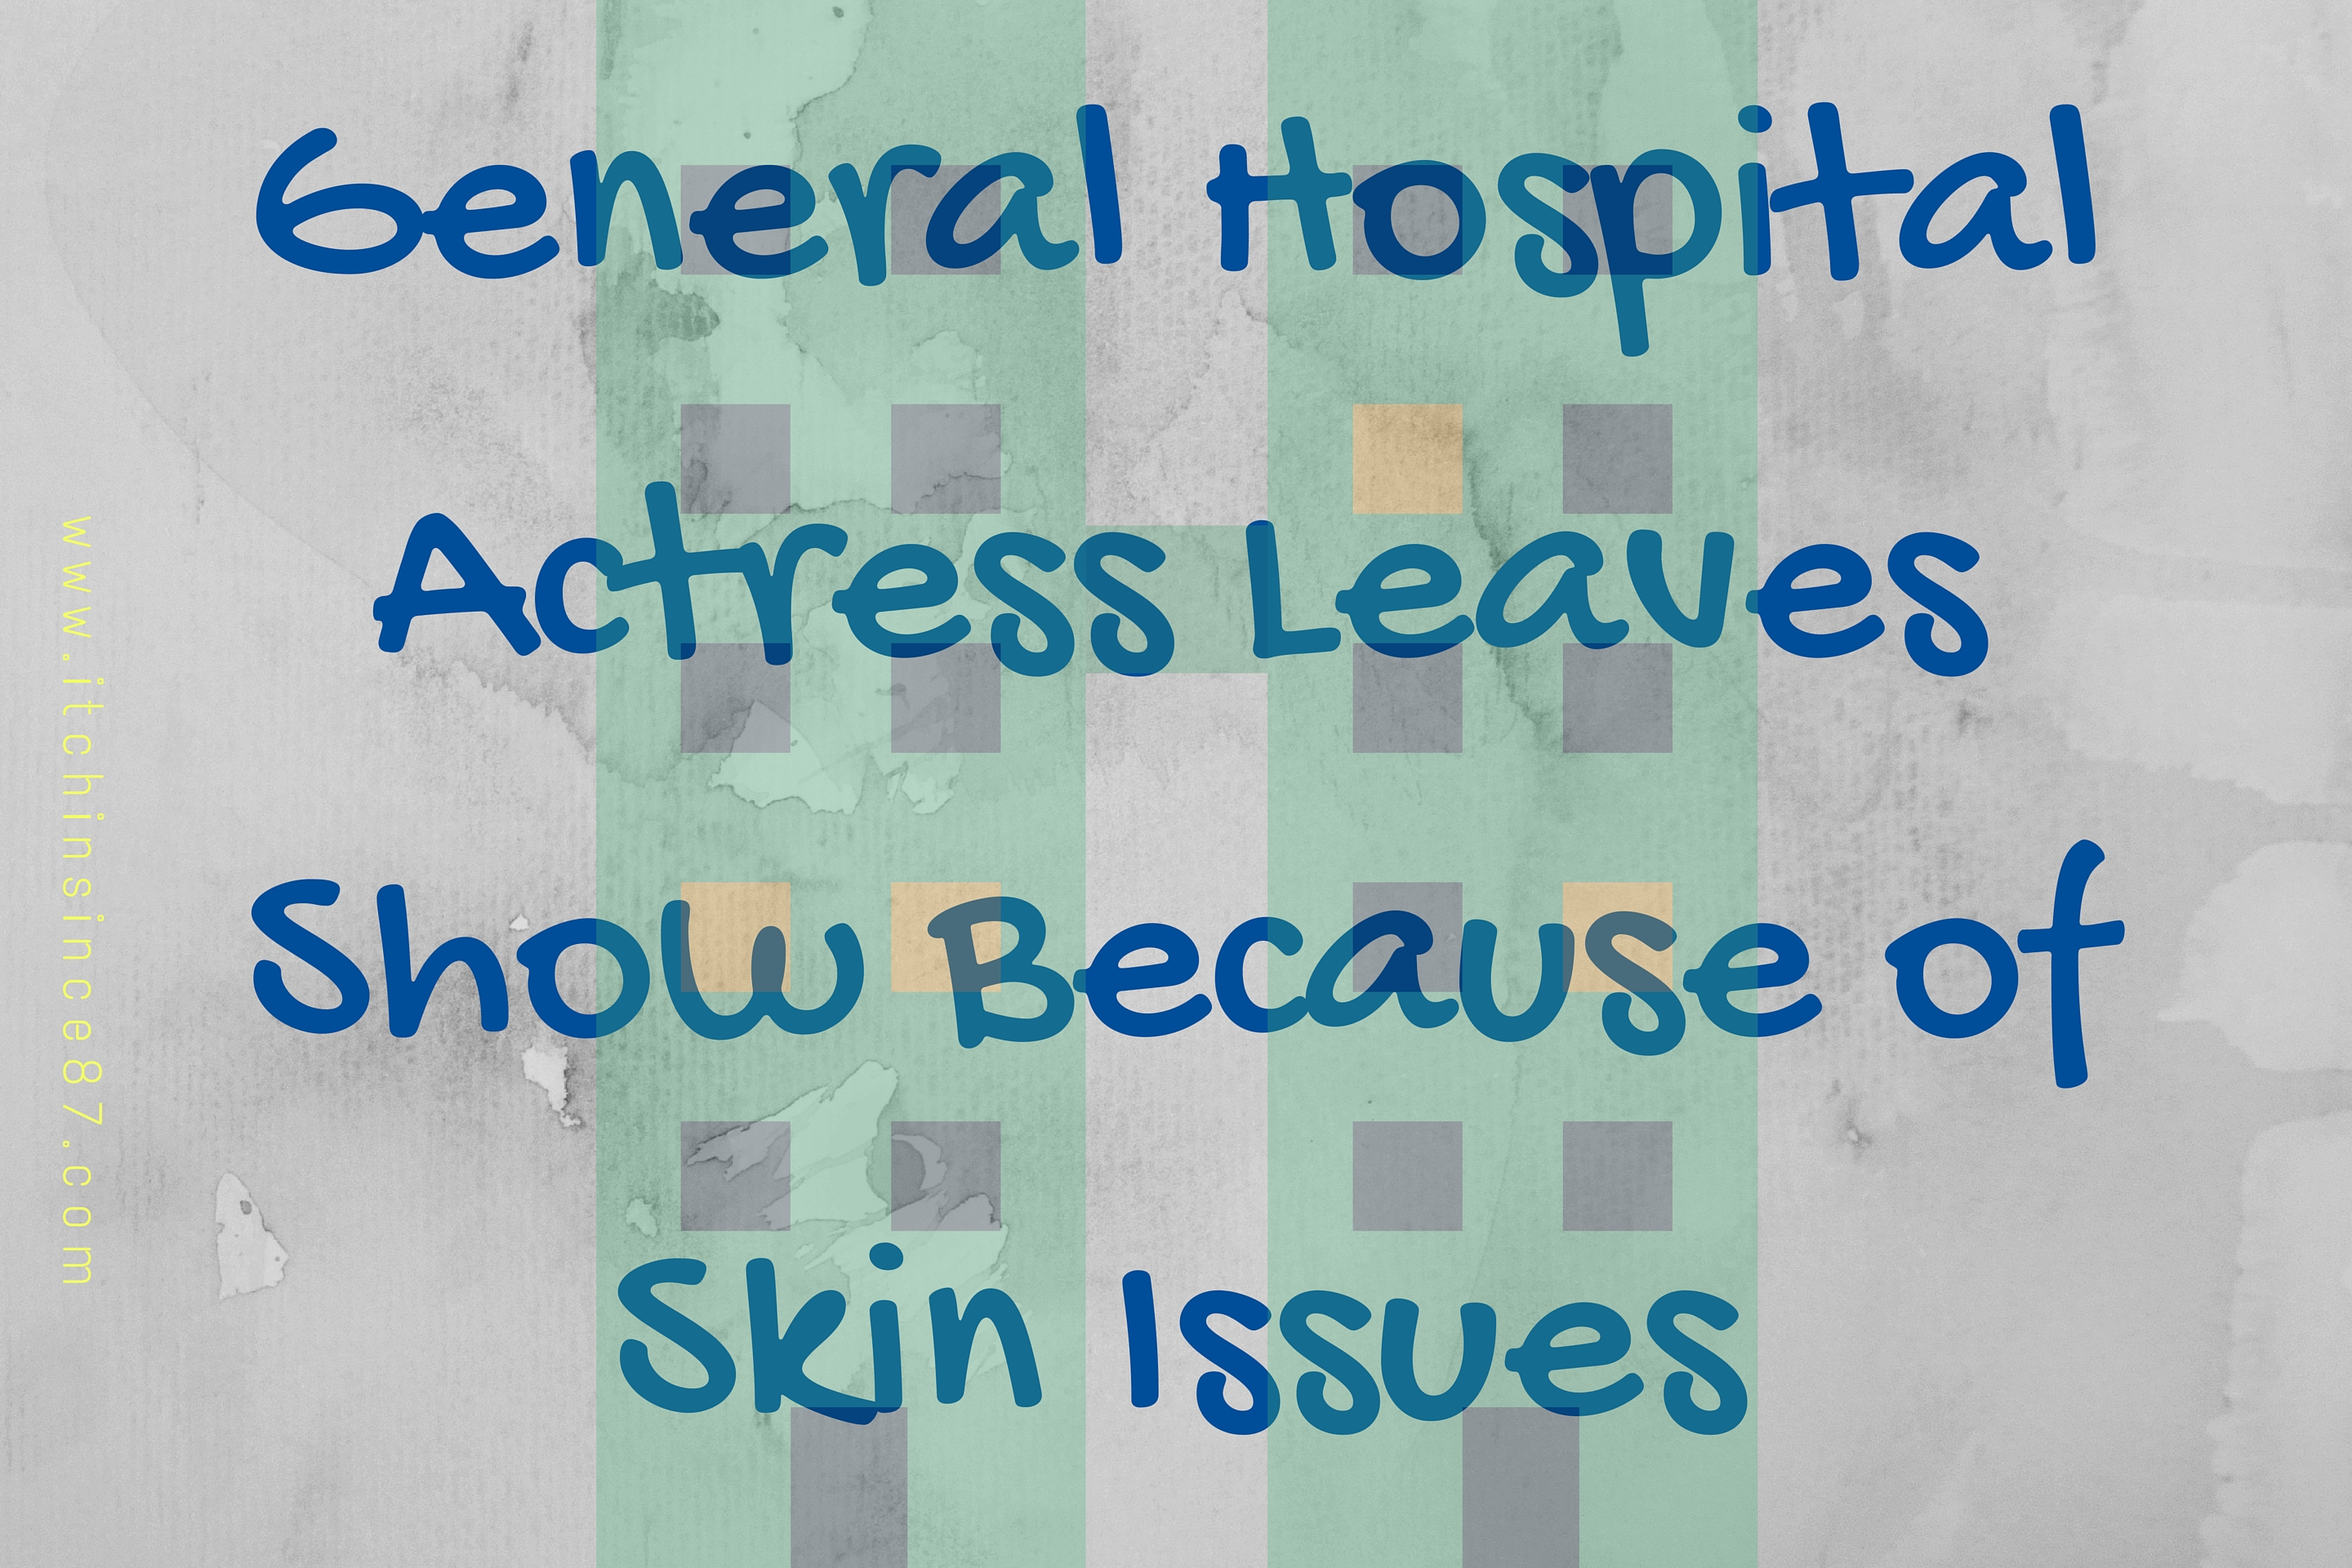 General Hospital Actress Leaves Show Because of Skin Issues